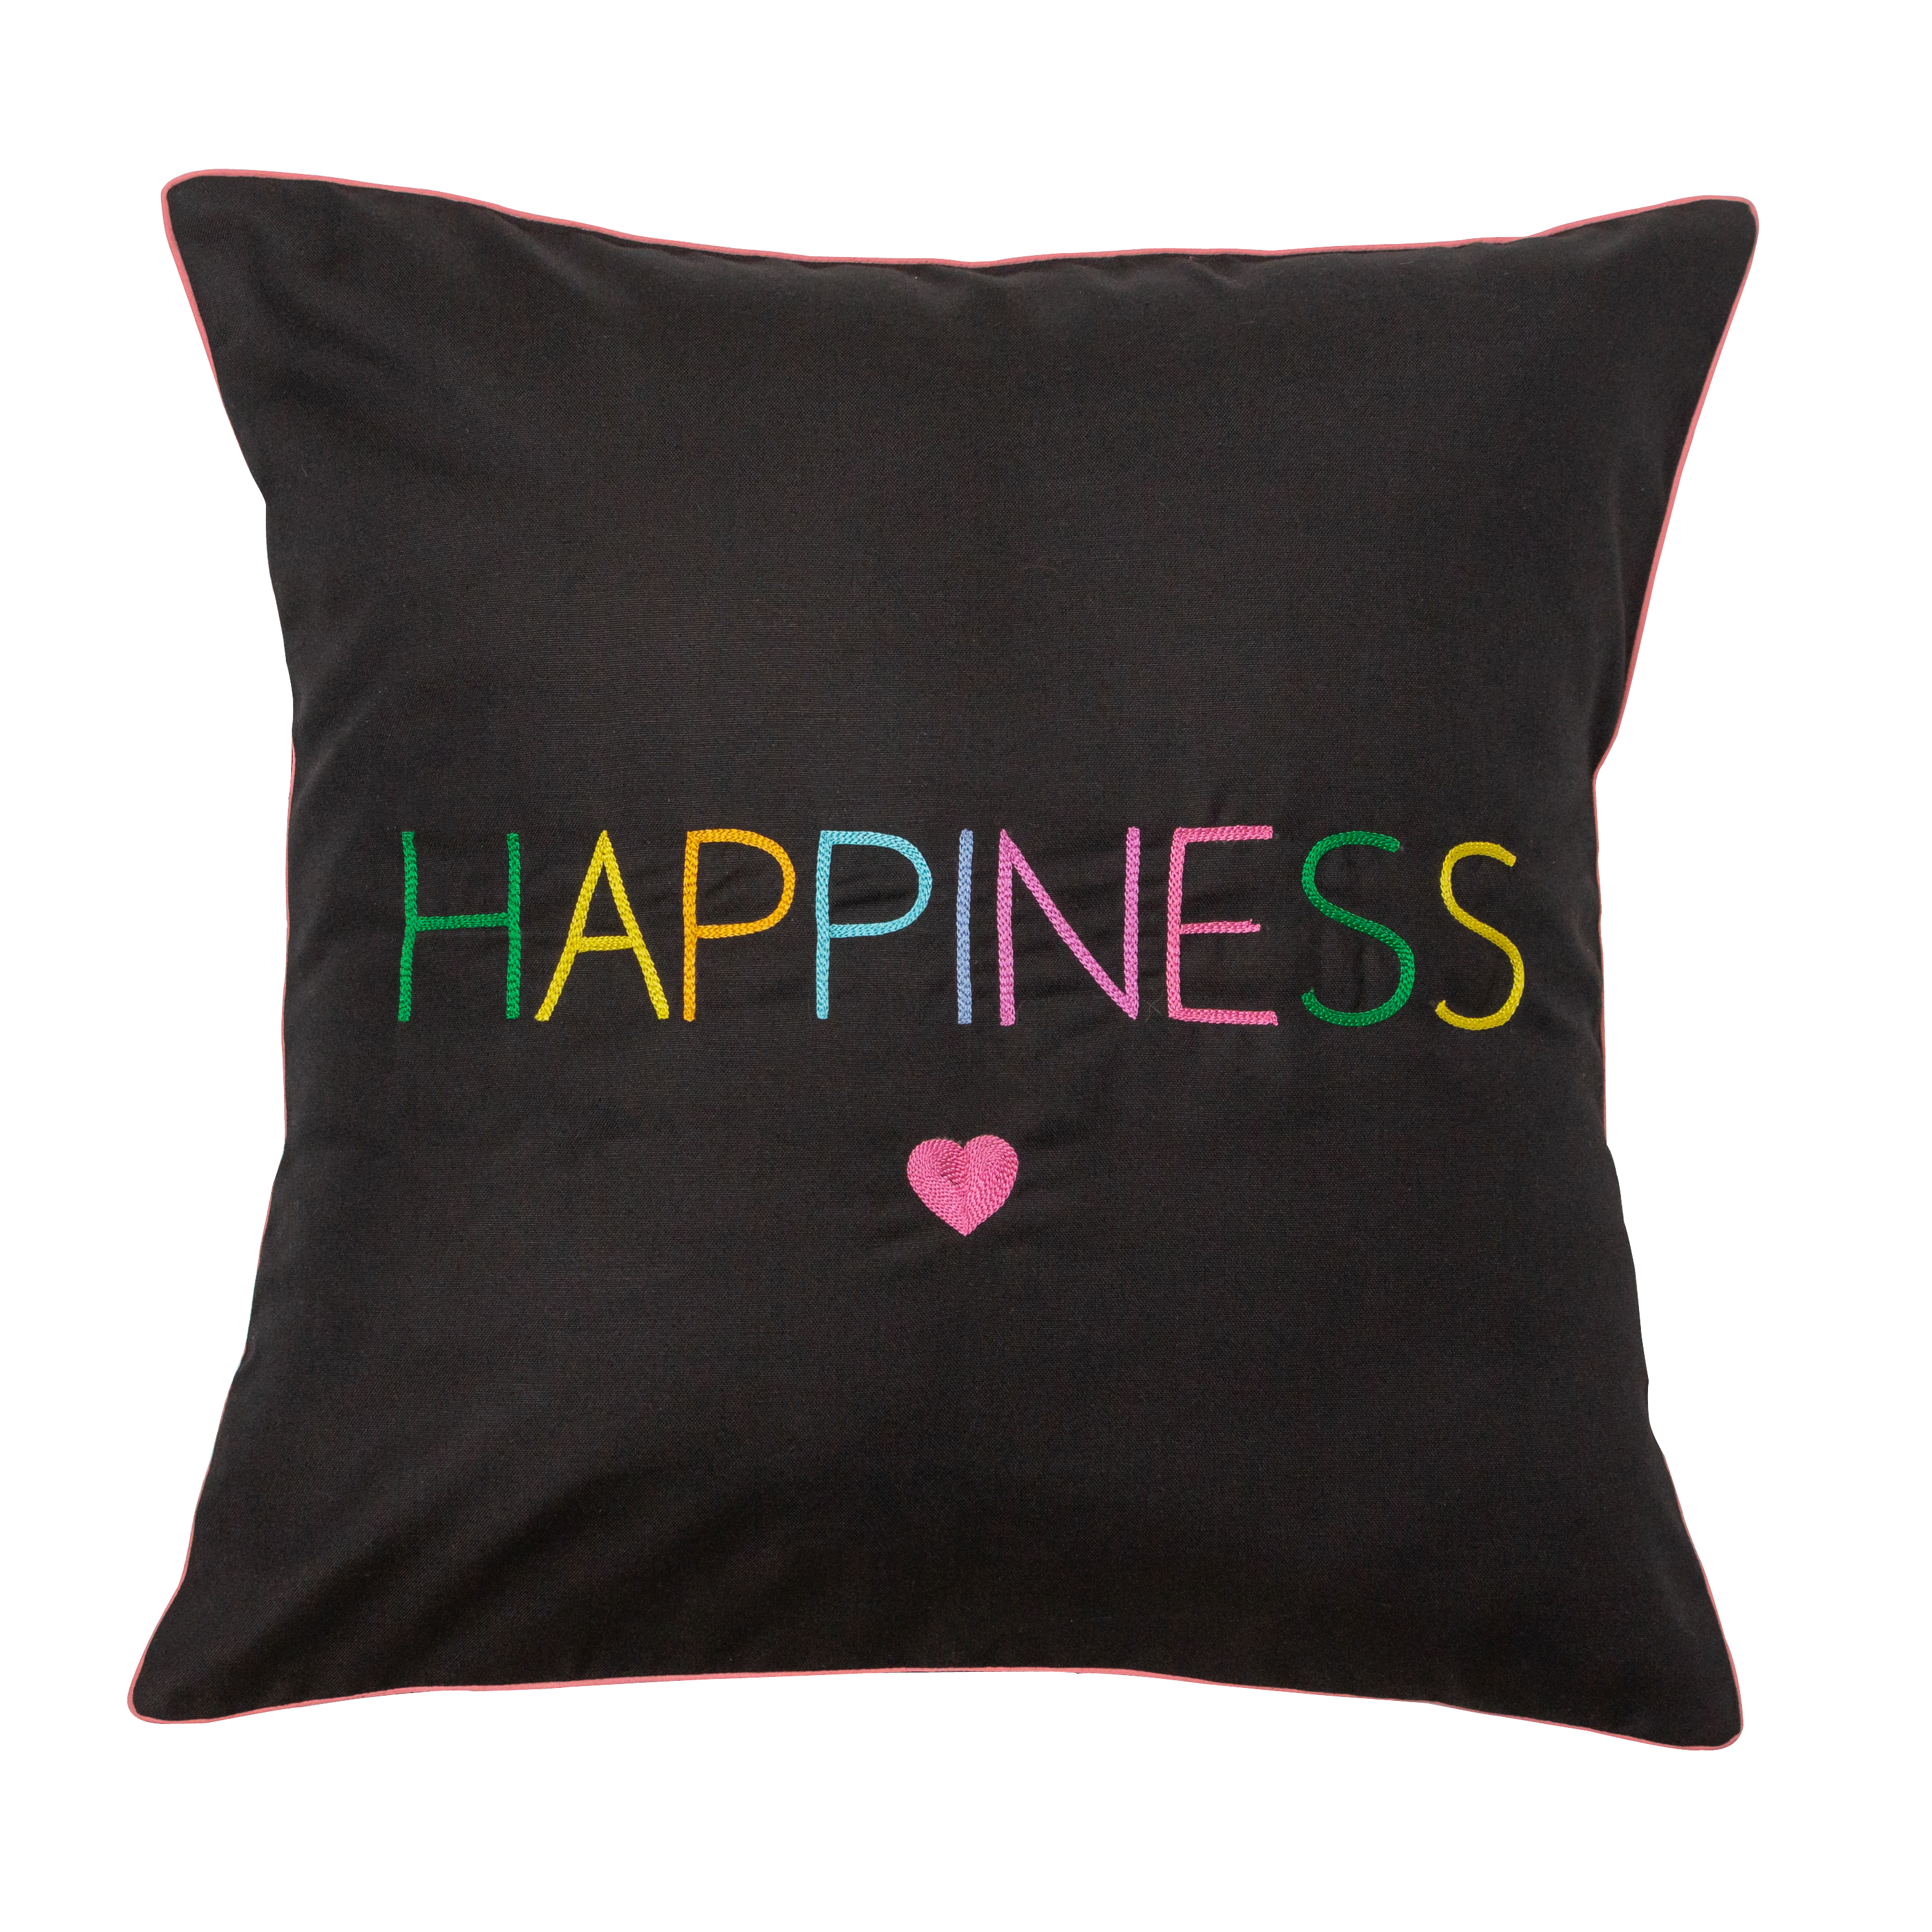 Happiness Cushion Cover